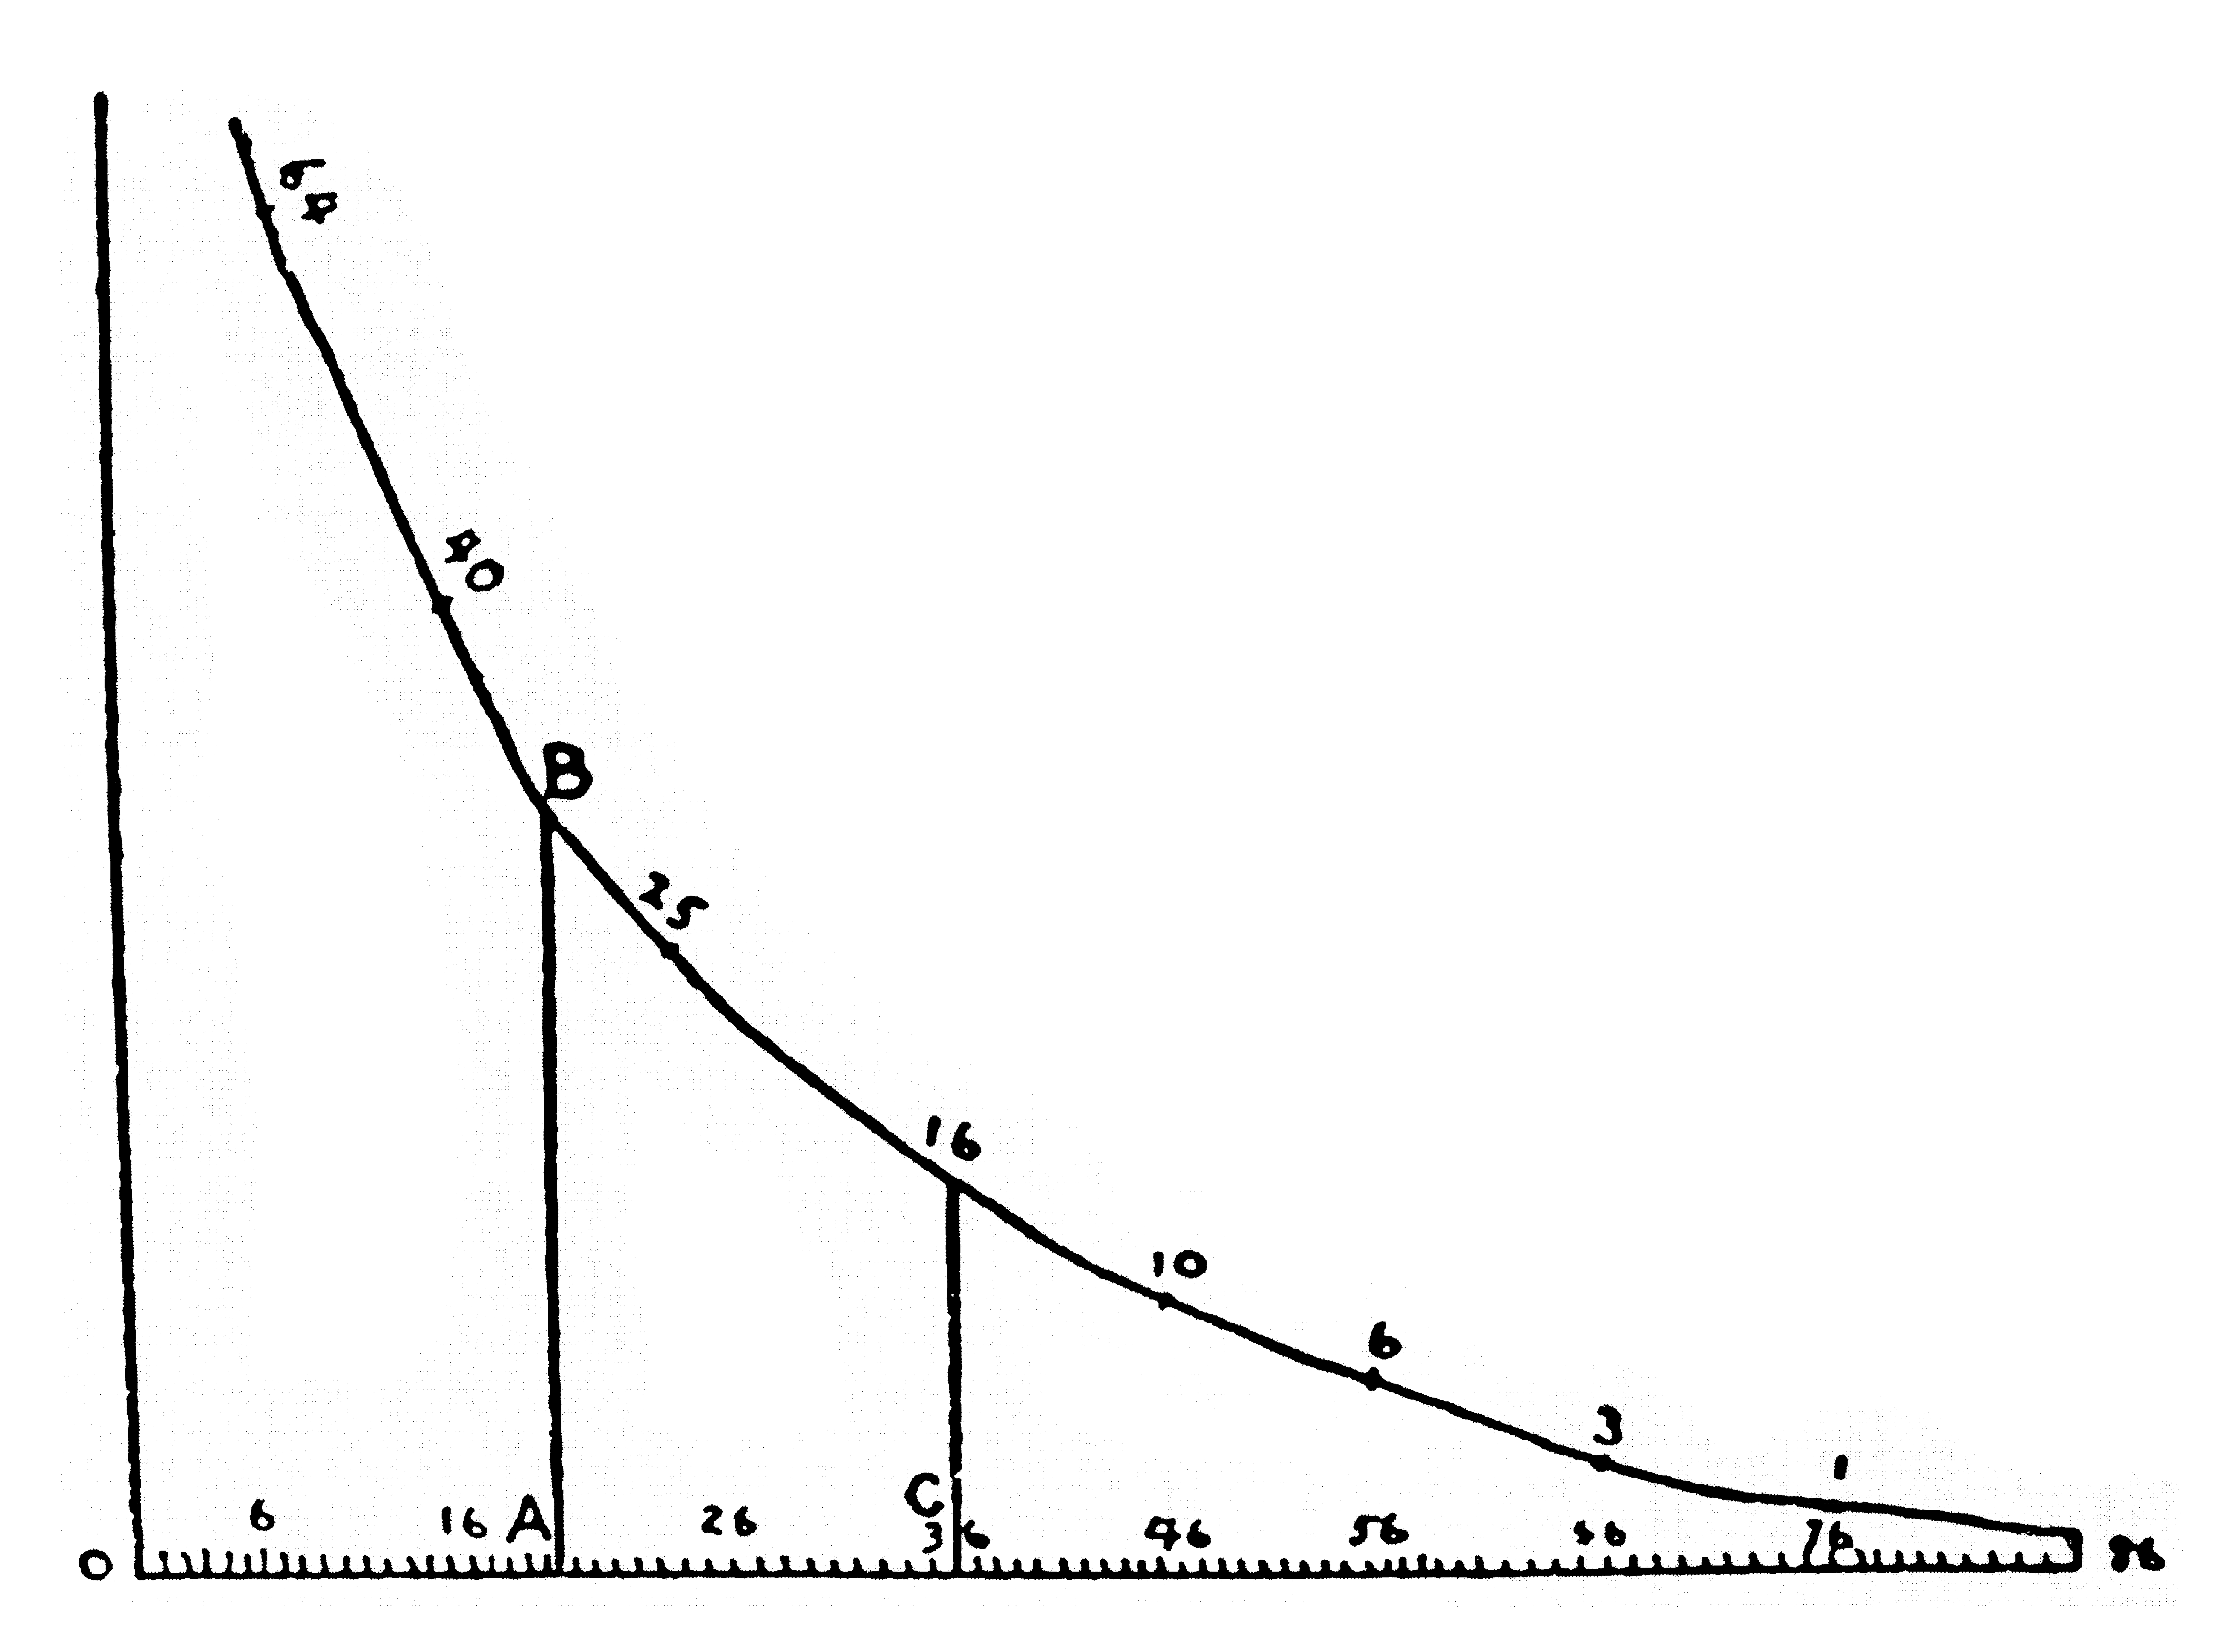 Huygens’s survival graph: Christiaan Huygens’s 1669 curve showing how many people out of a hundred survive between the ages of infancy and eighty-six.